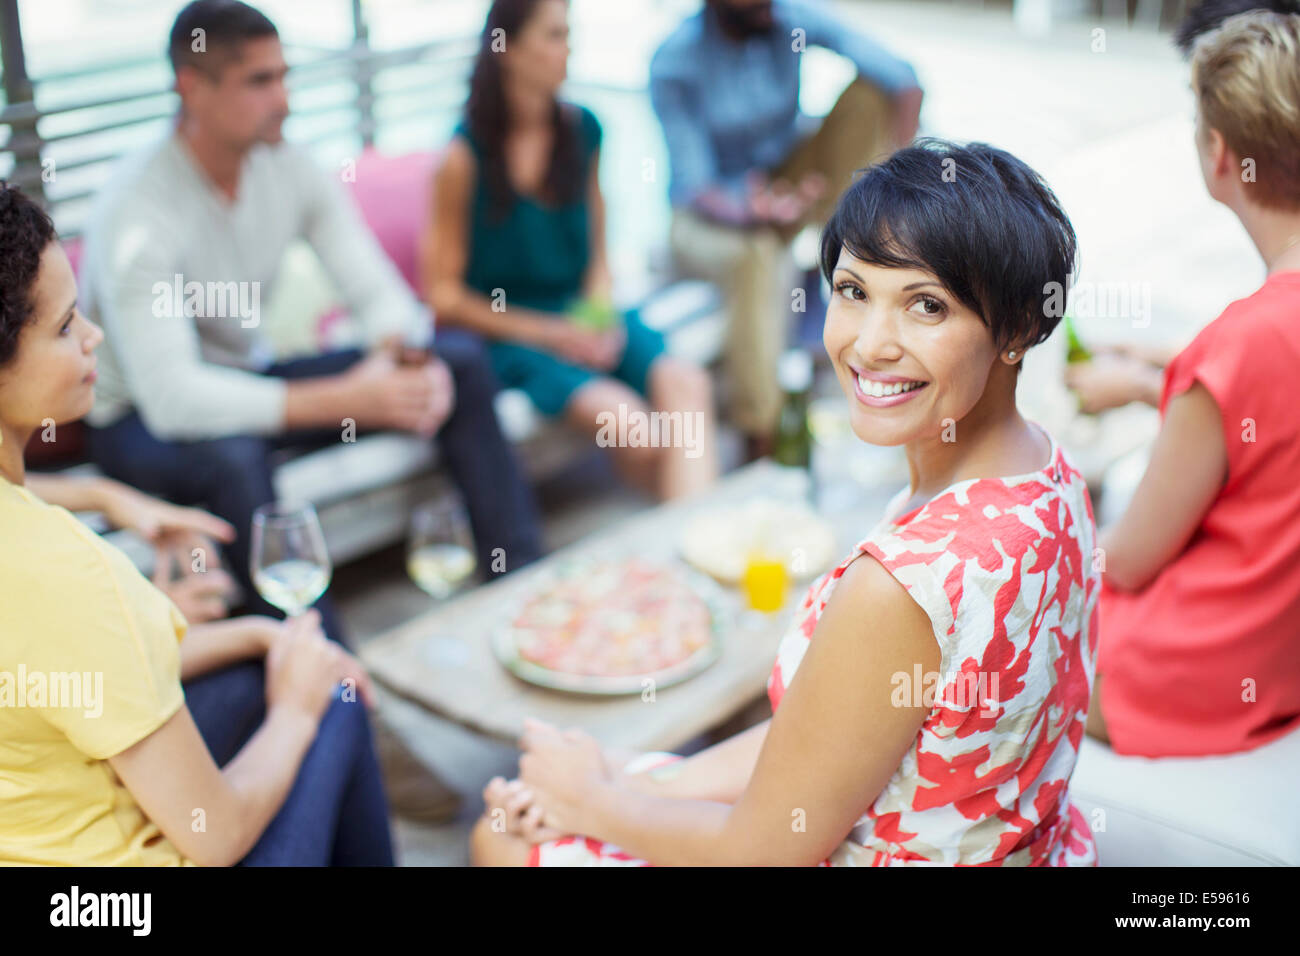 Woman smiling at party Banque D'Images